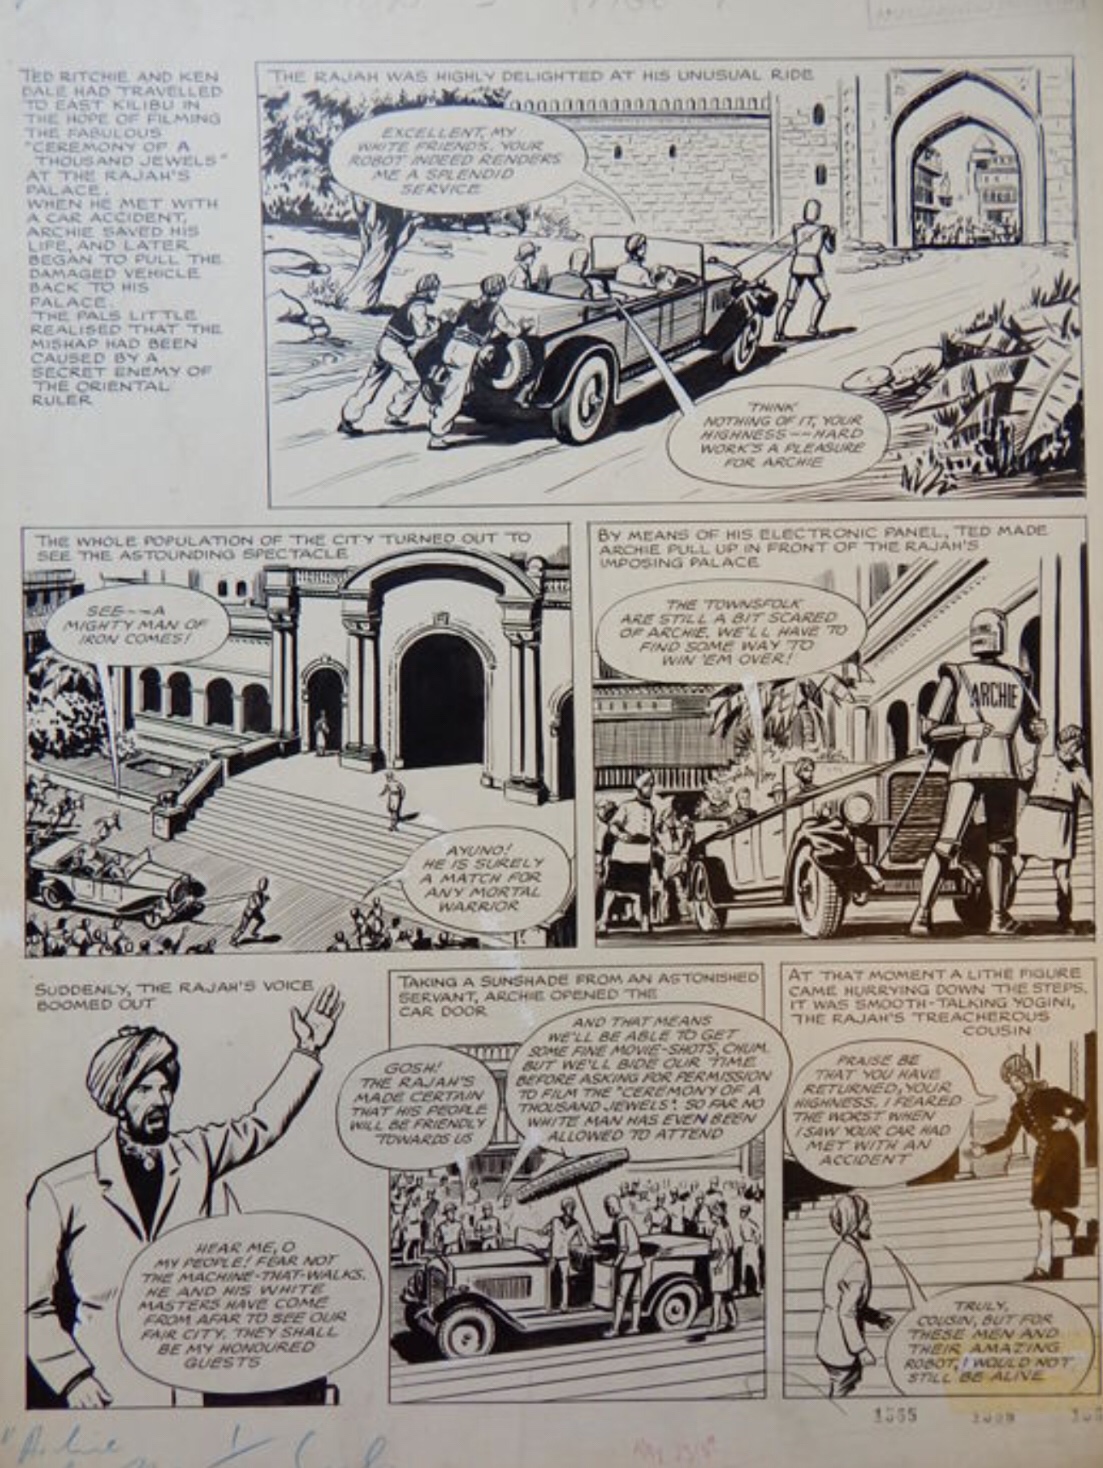 A page from a 1958 “Robot Archie” story, art by by Ted Kearon - titled “Archie, de man van Staal - Bodyguard to the menaced Rajan”